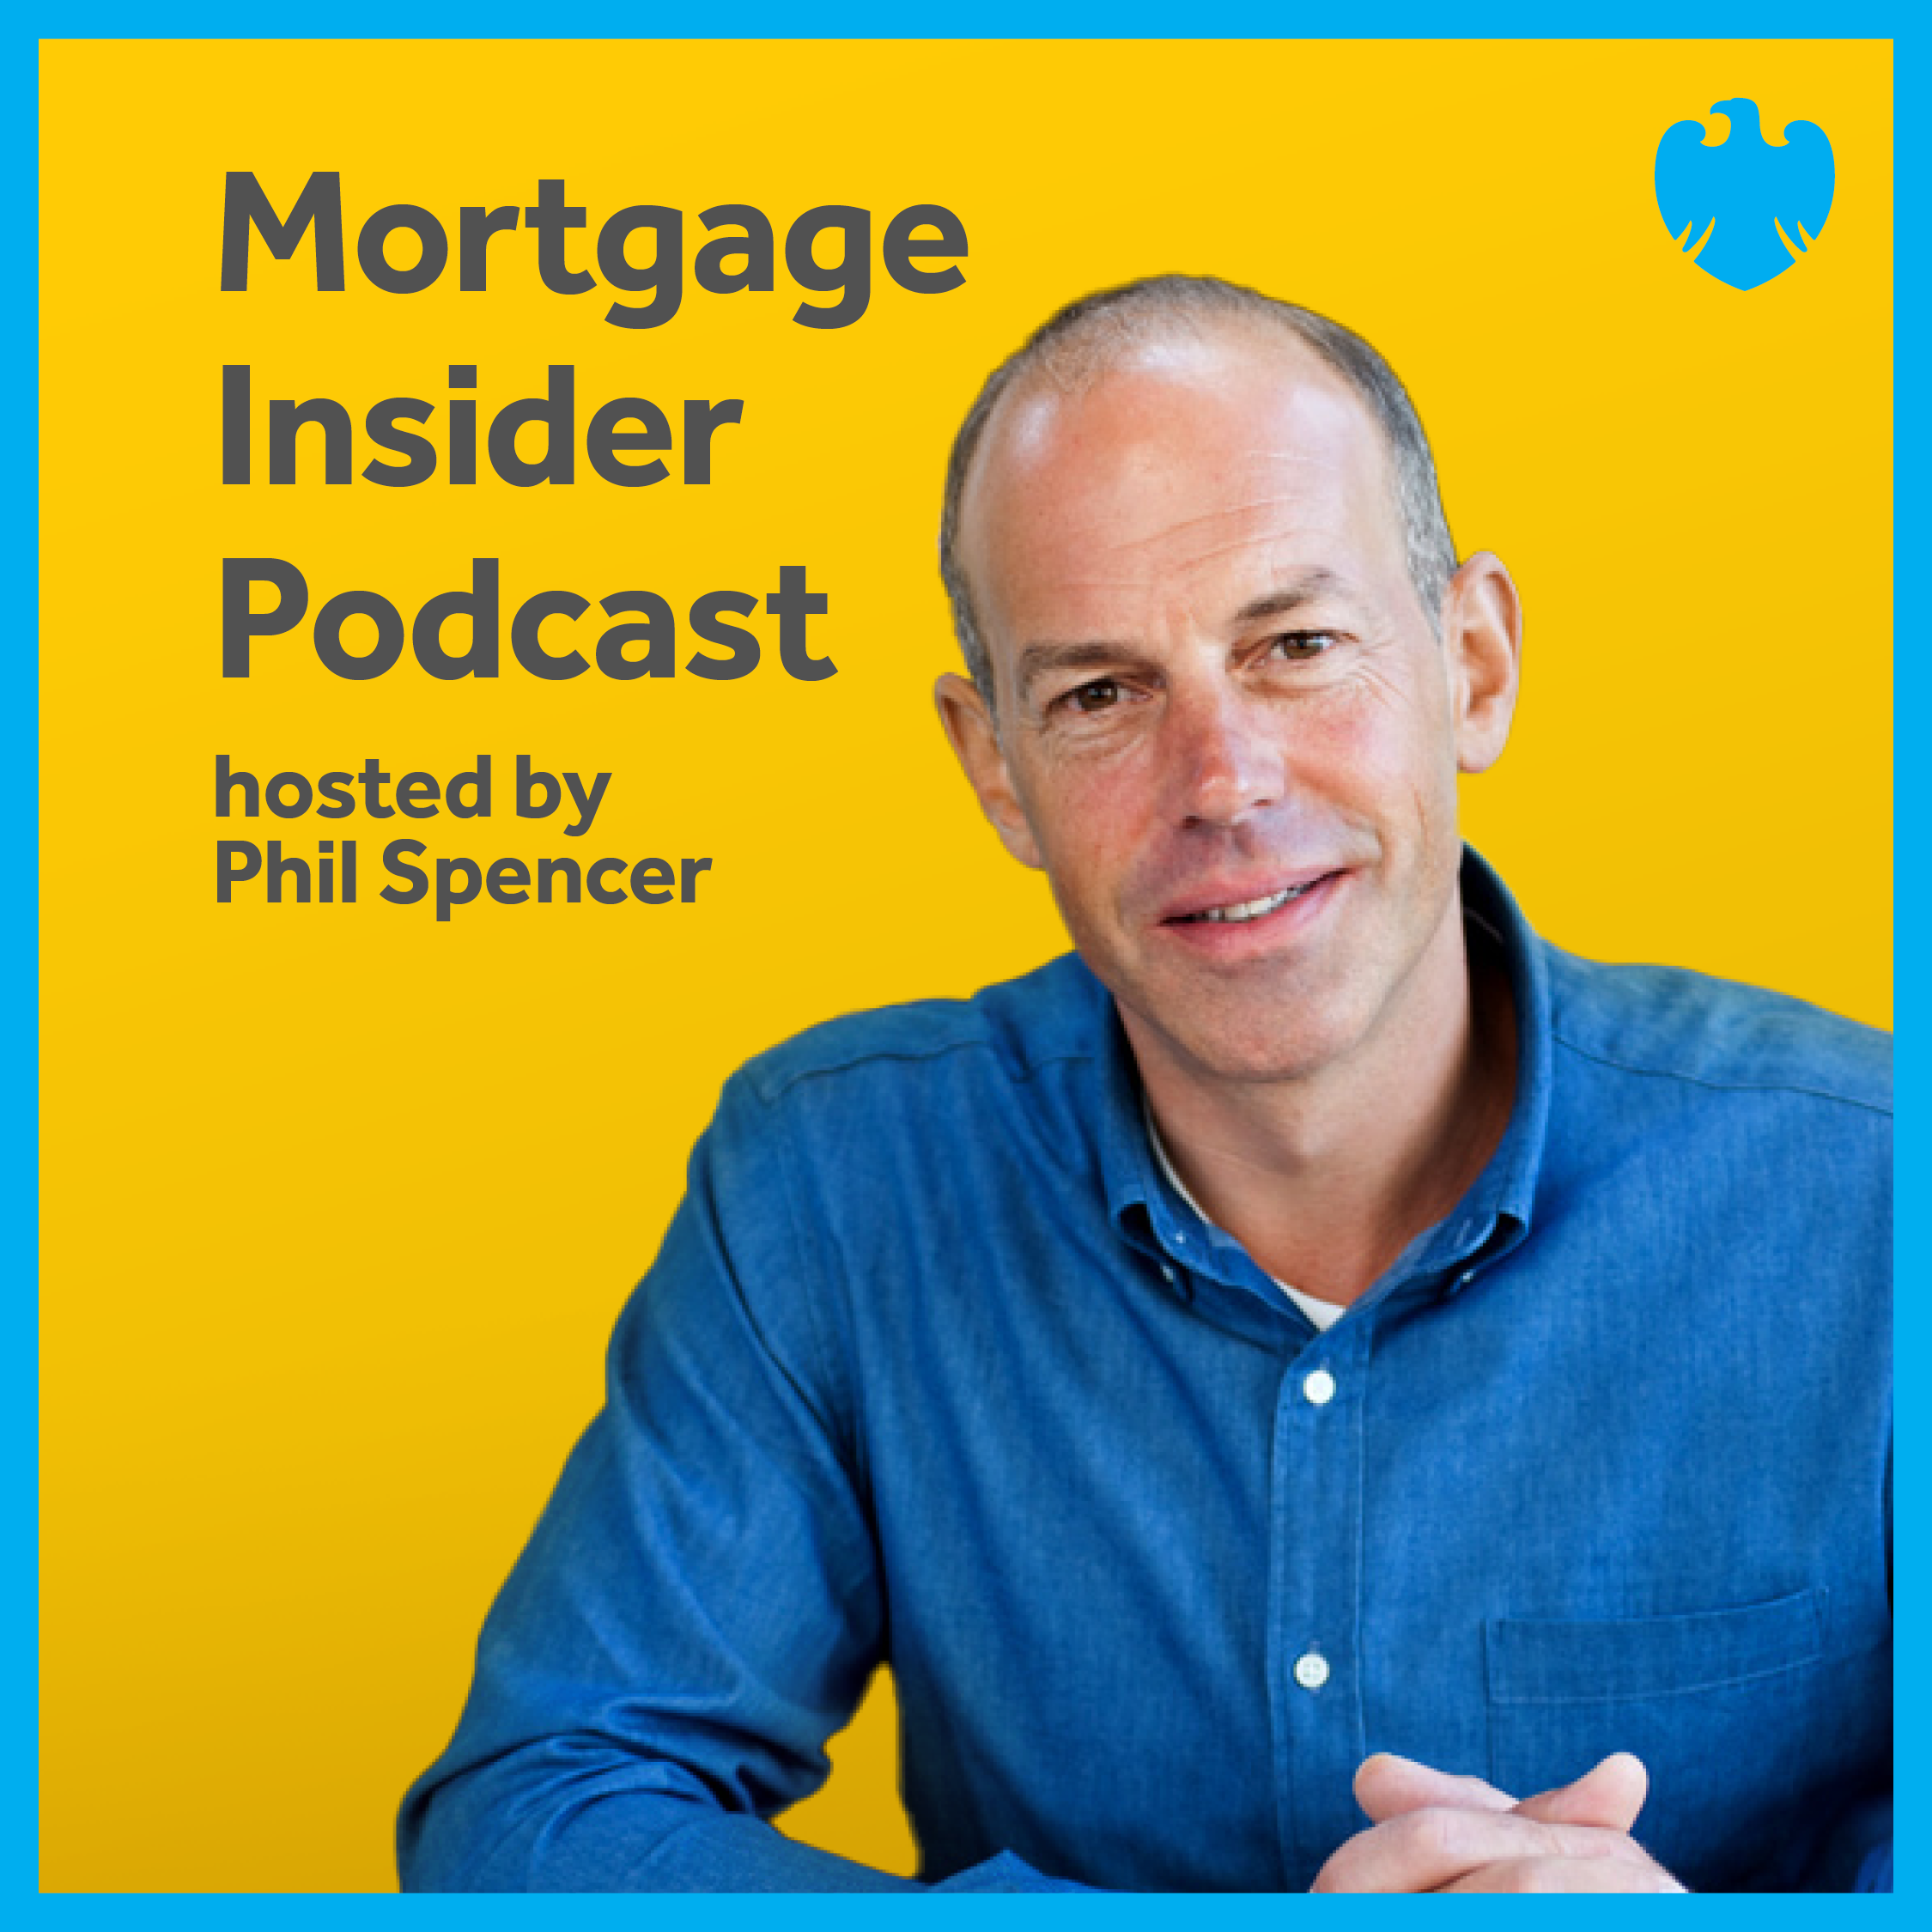 IBIM11526-Podcast-series-4_Podcast_MortgageInsider_1080x1080_5.png